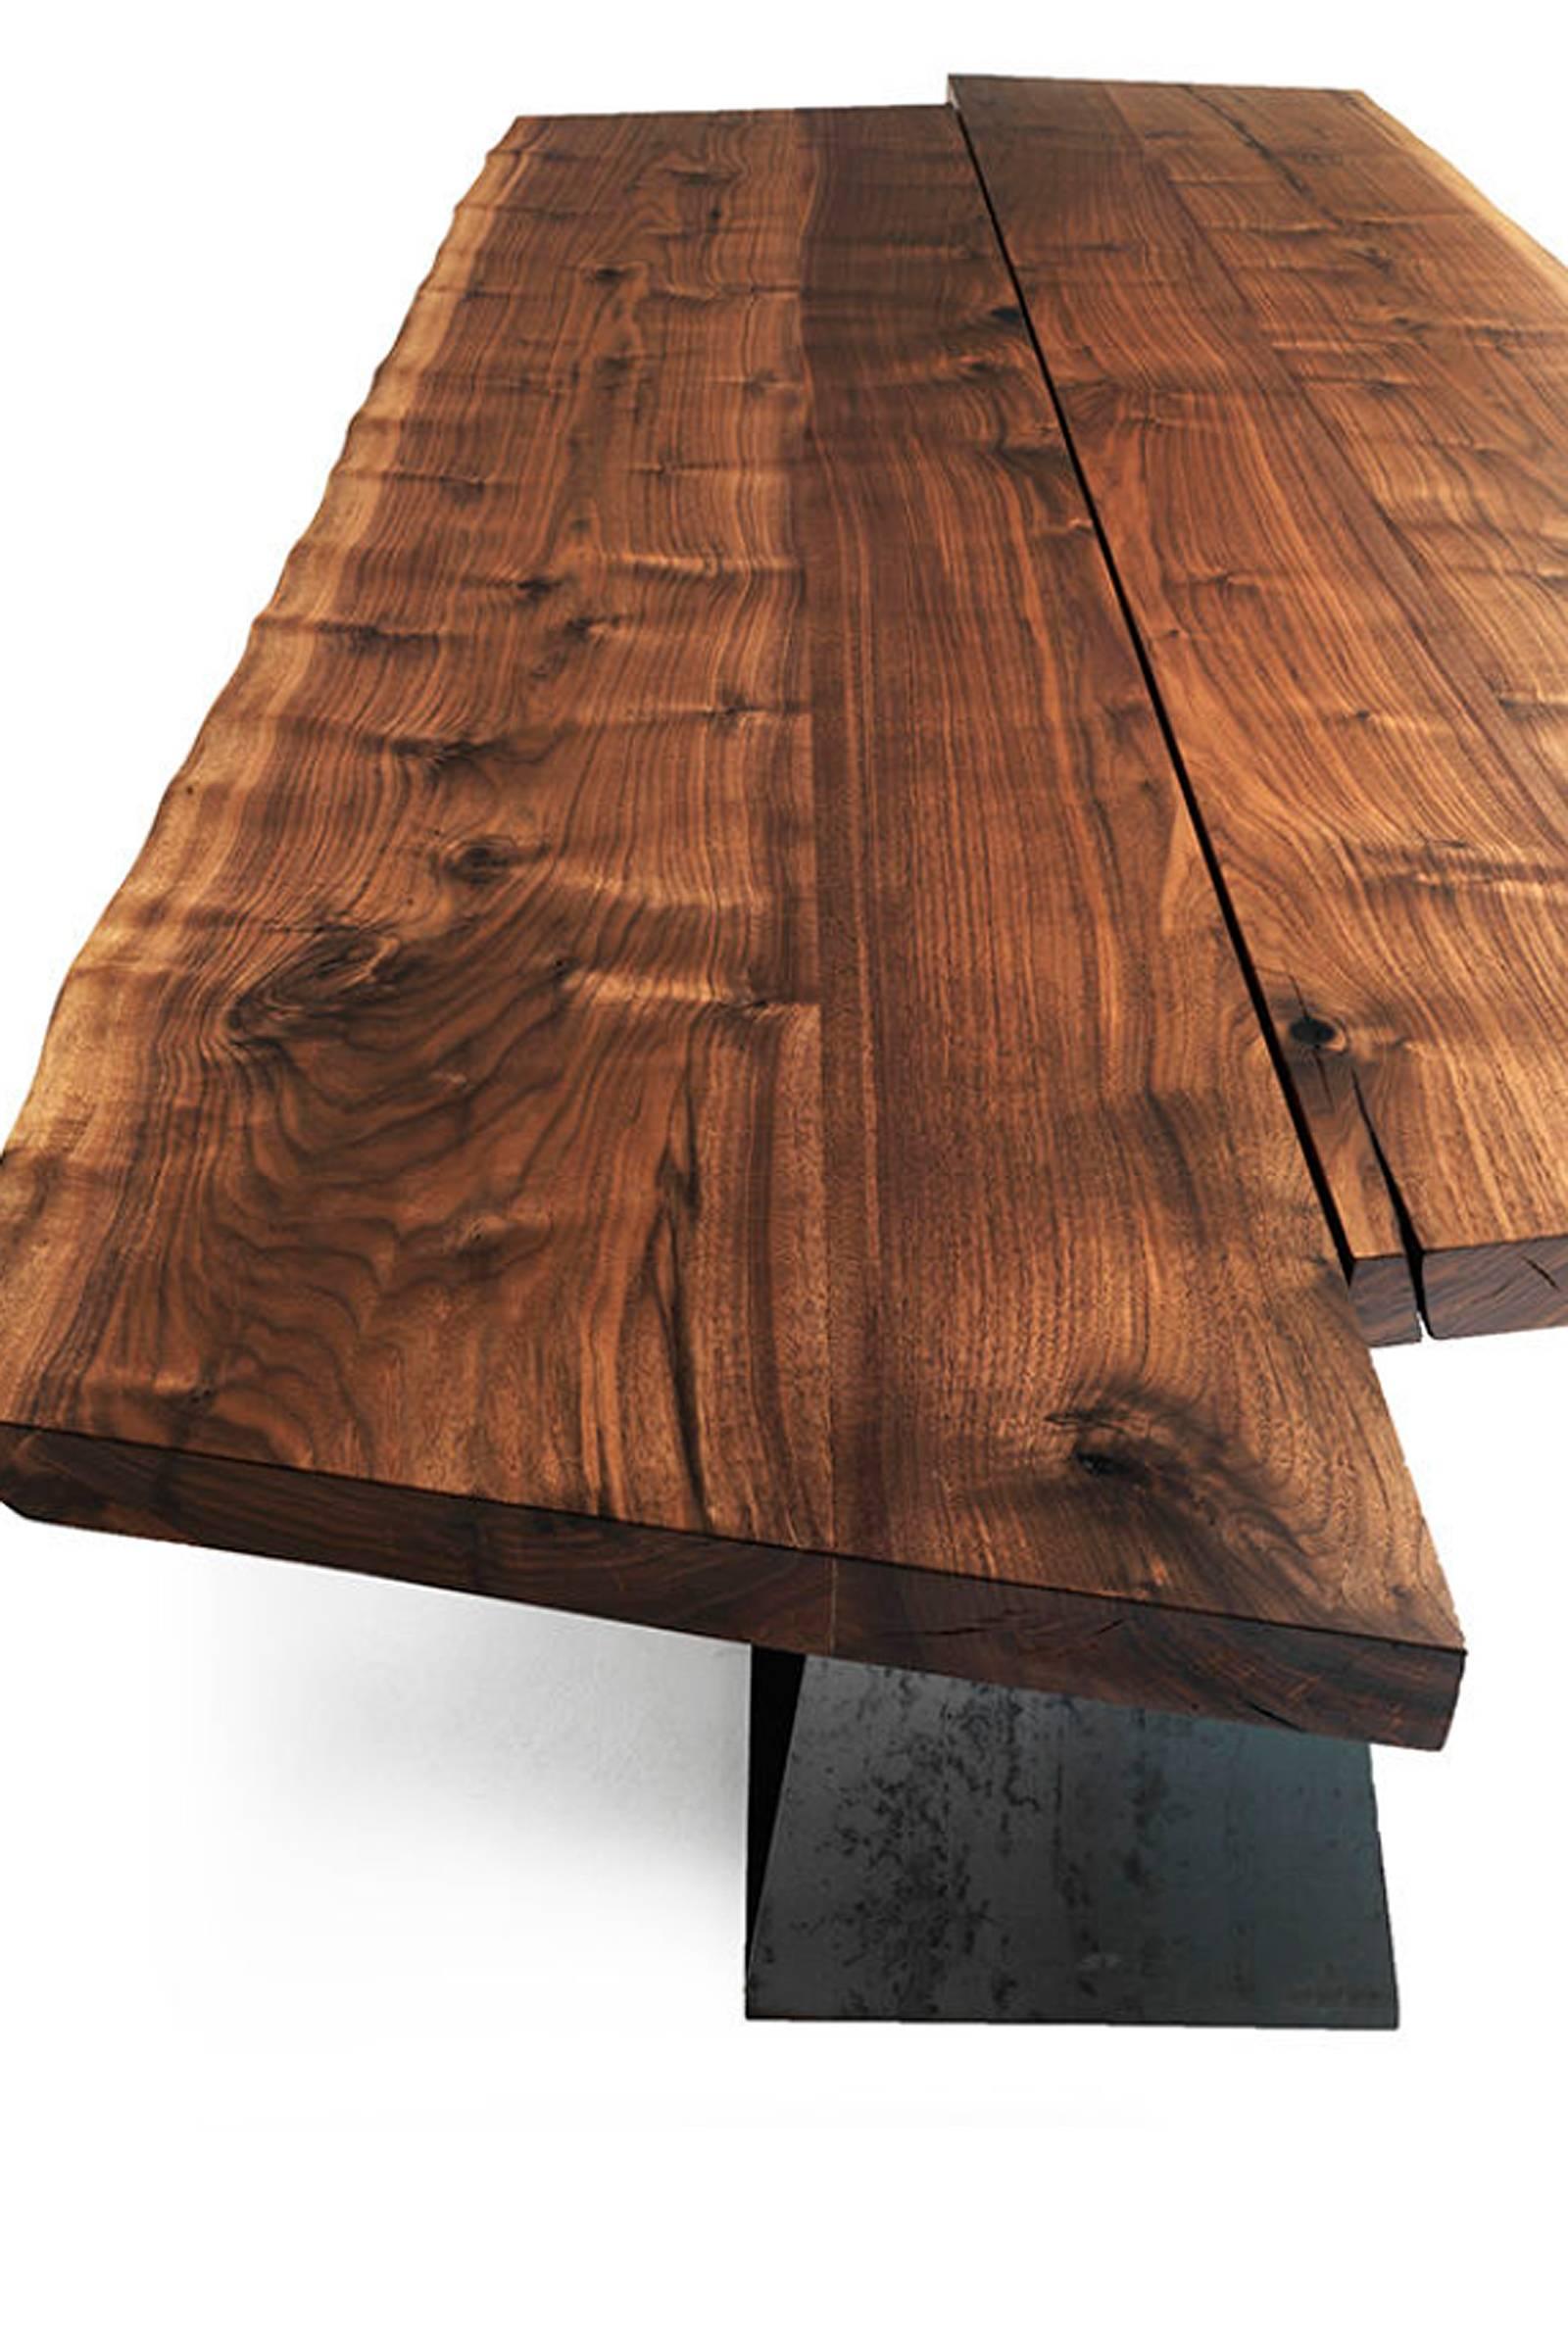 Italian Table Trapeze Top B in Natural Solid Oak Wood and Base in Iron Painted Mat Color